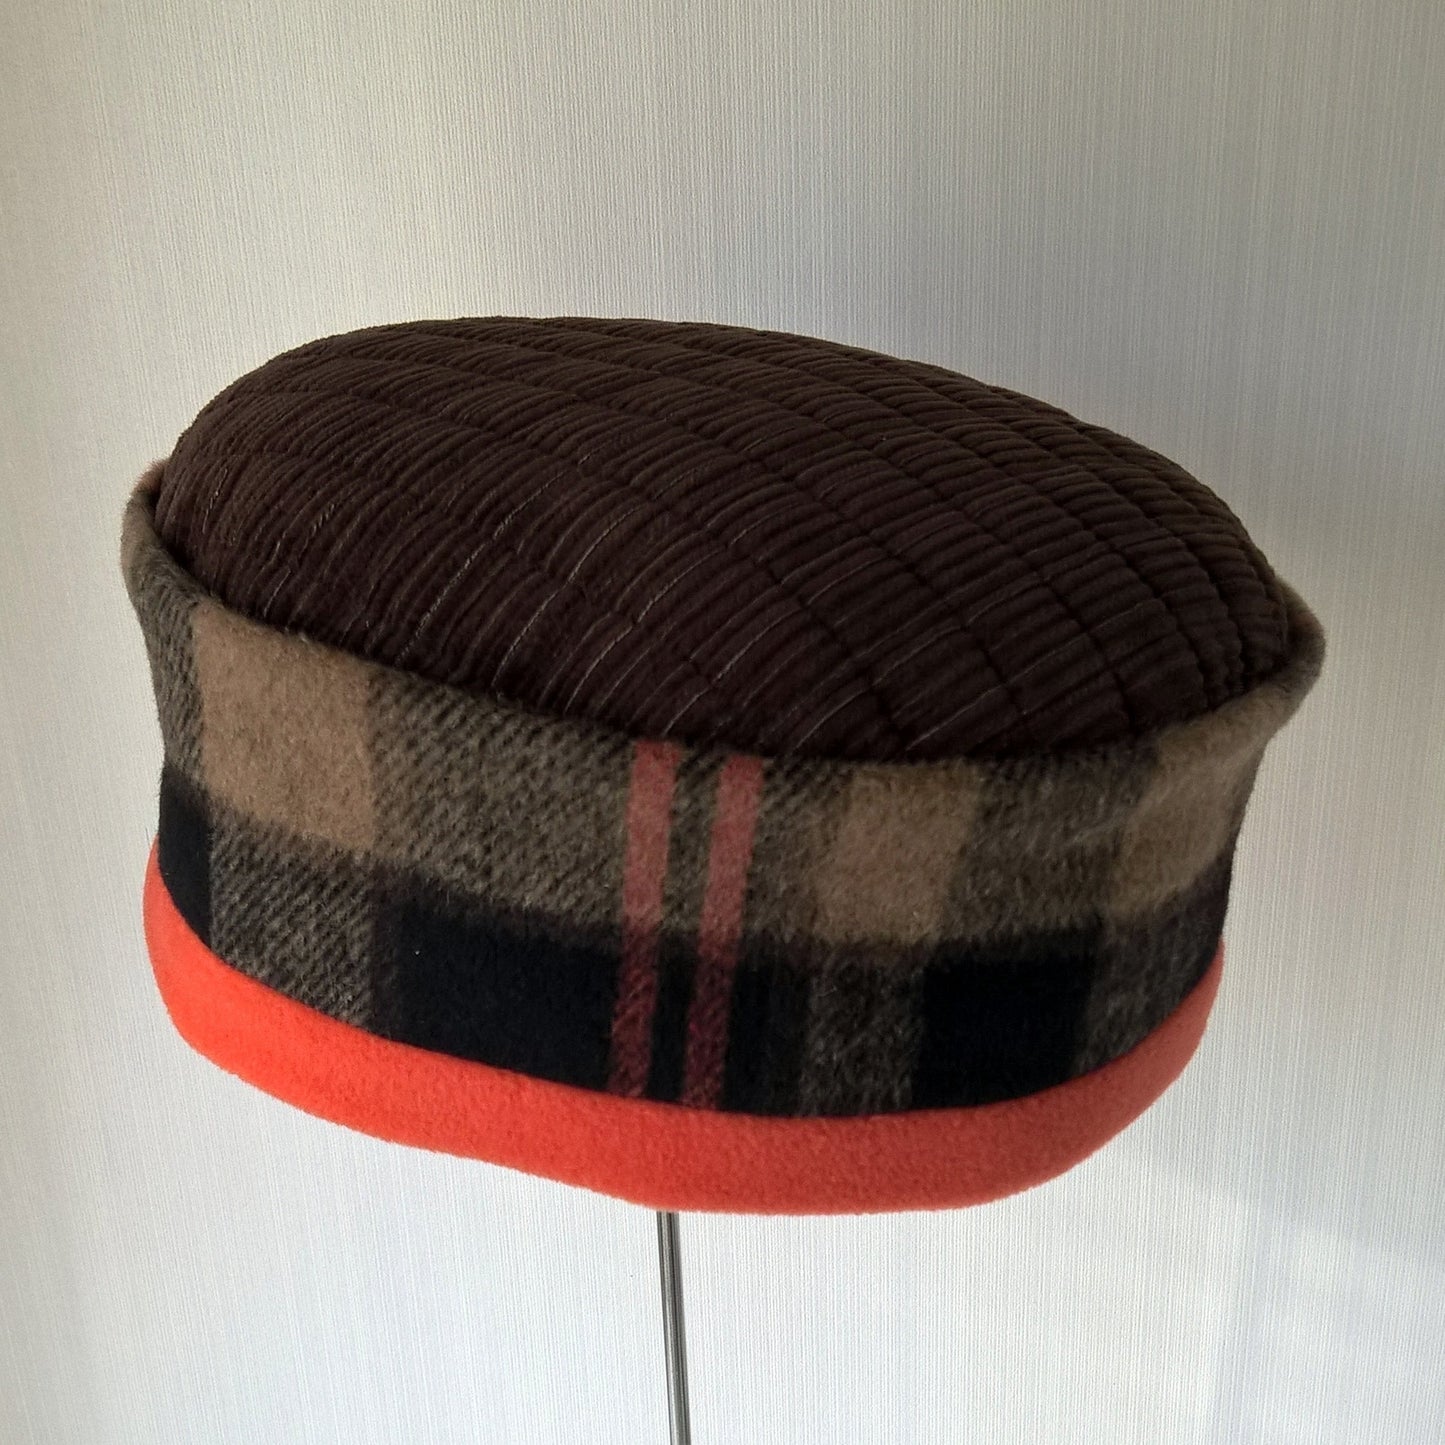 Handmade brimless hat in brown and orange check fleece and corduroy